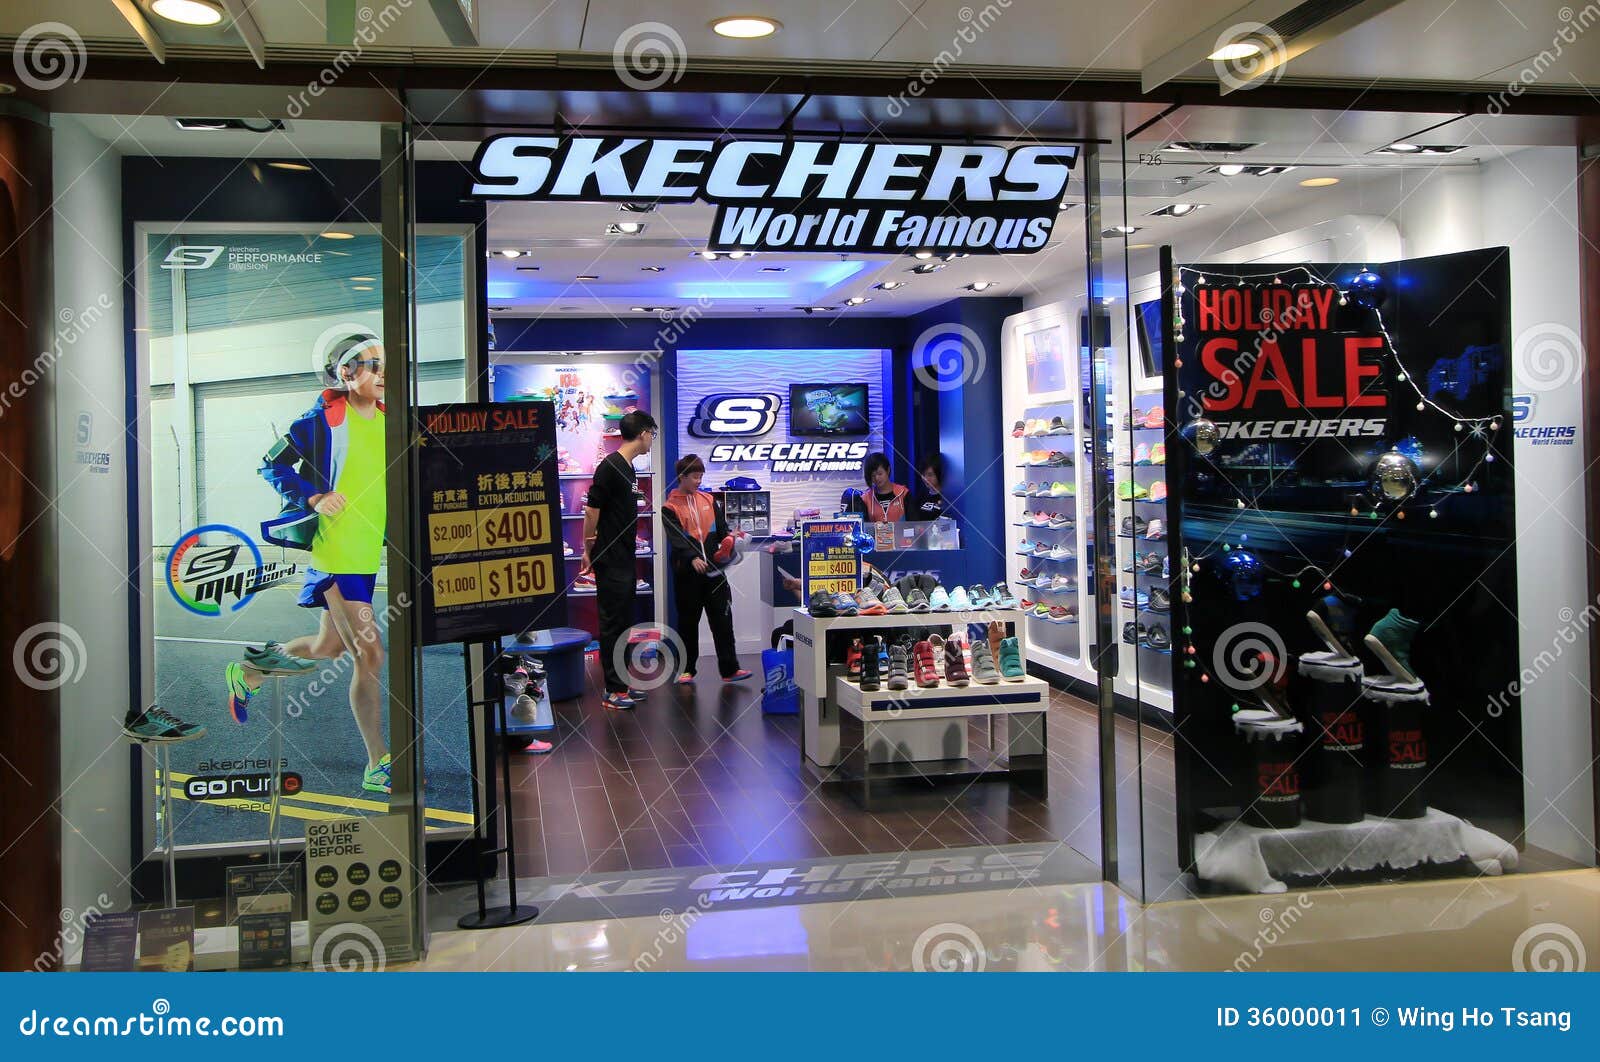 where's the closest skechers store off 